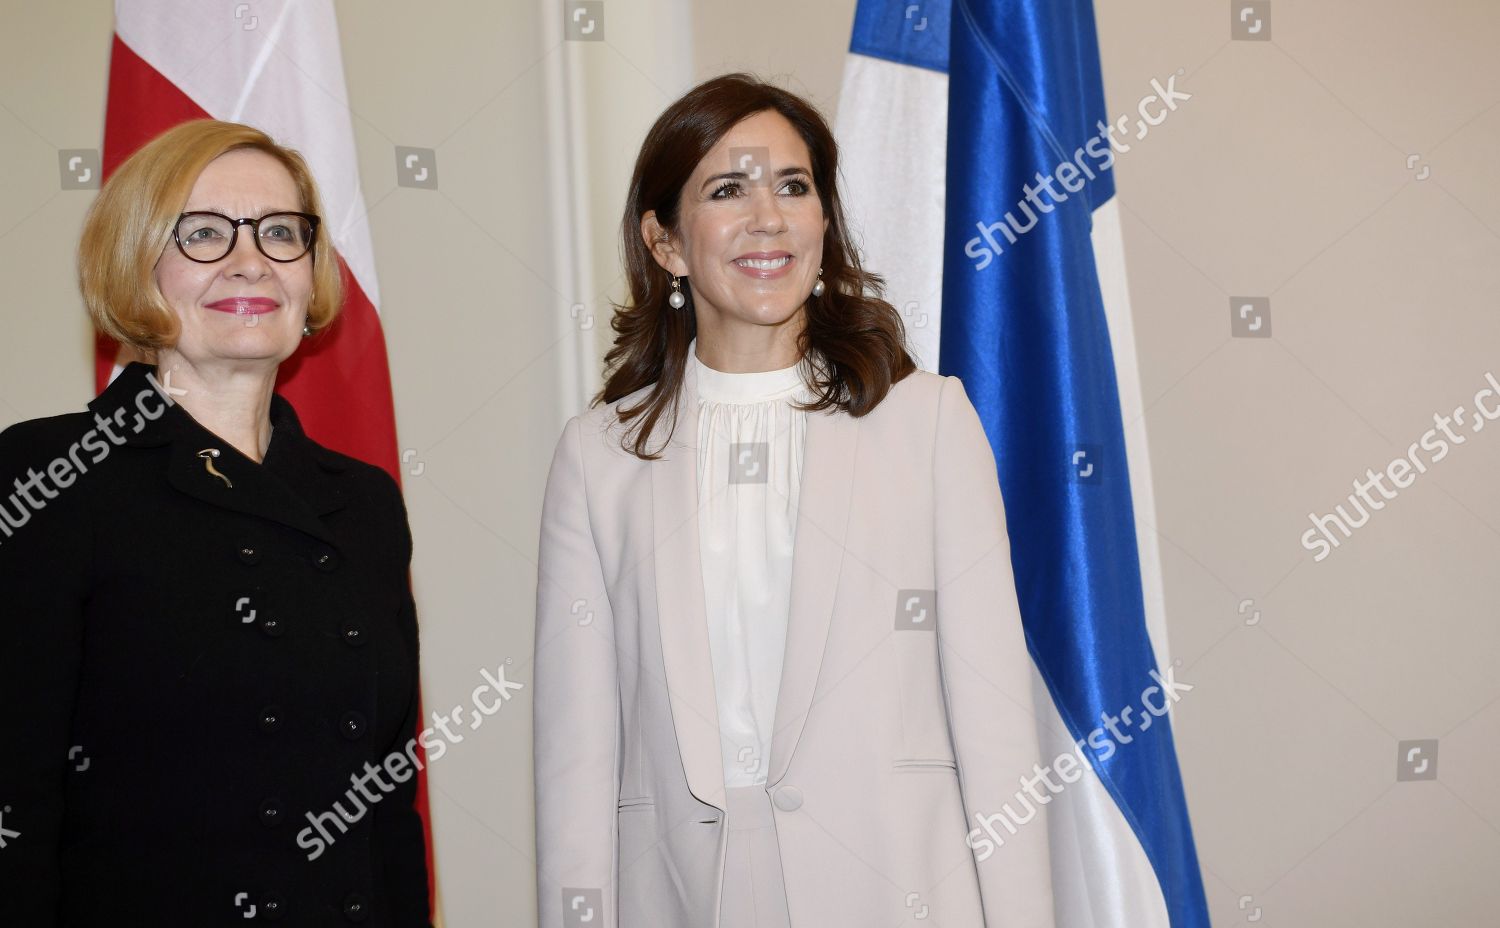 crown-princess-mary-visit-to-finland-shutterstock-editorial-9881095b.jpg